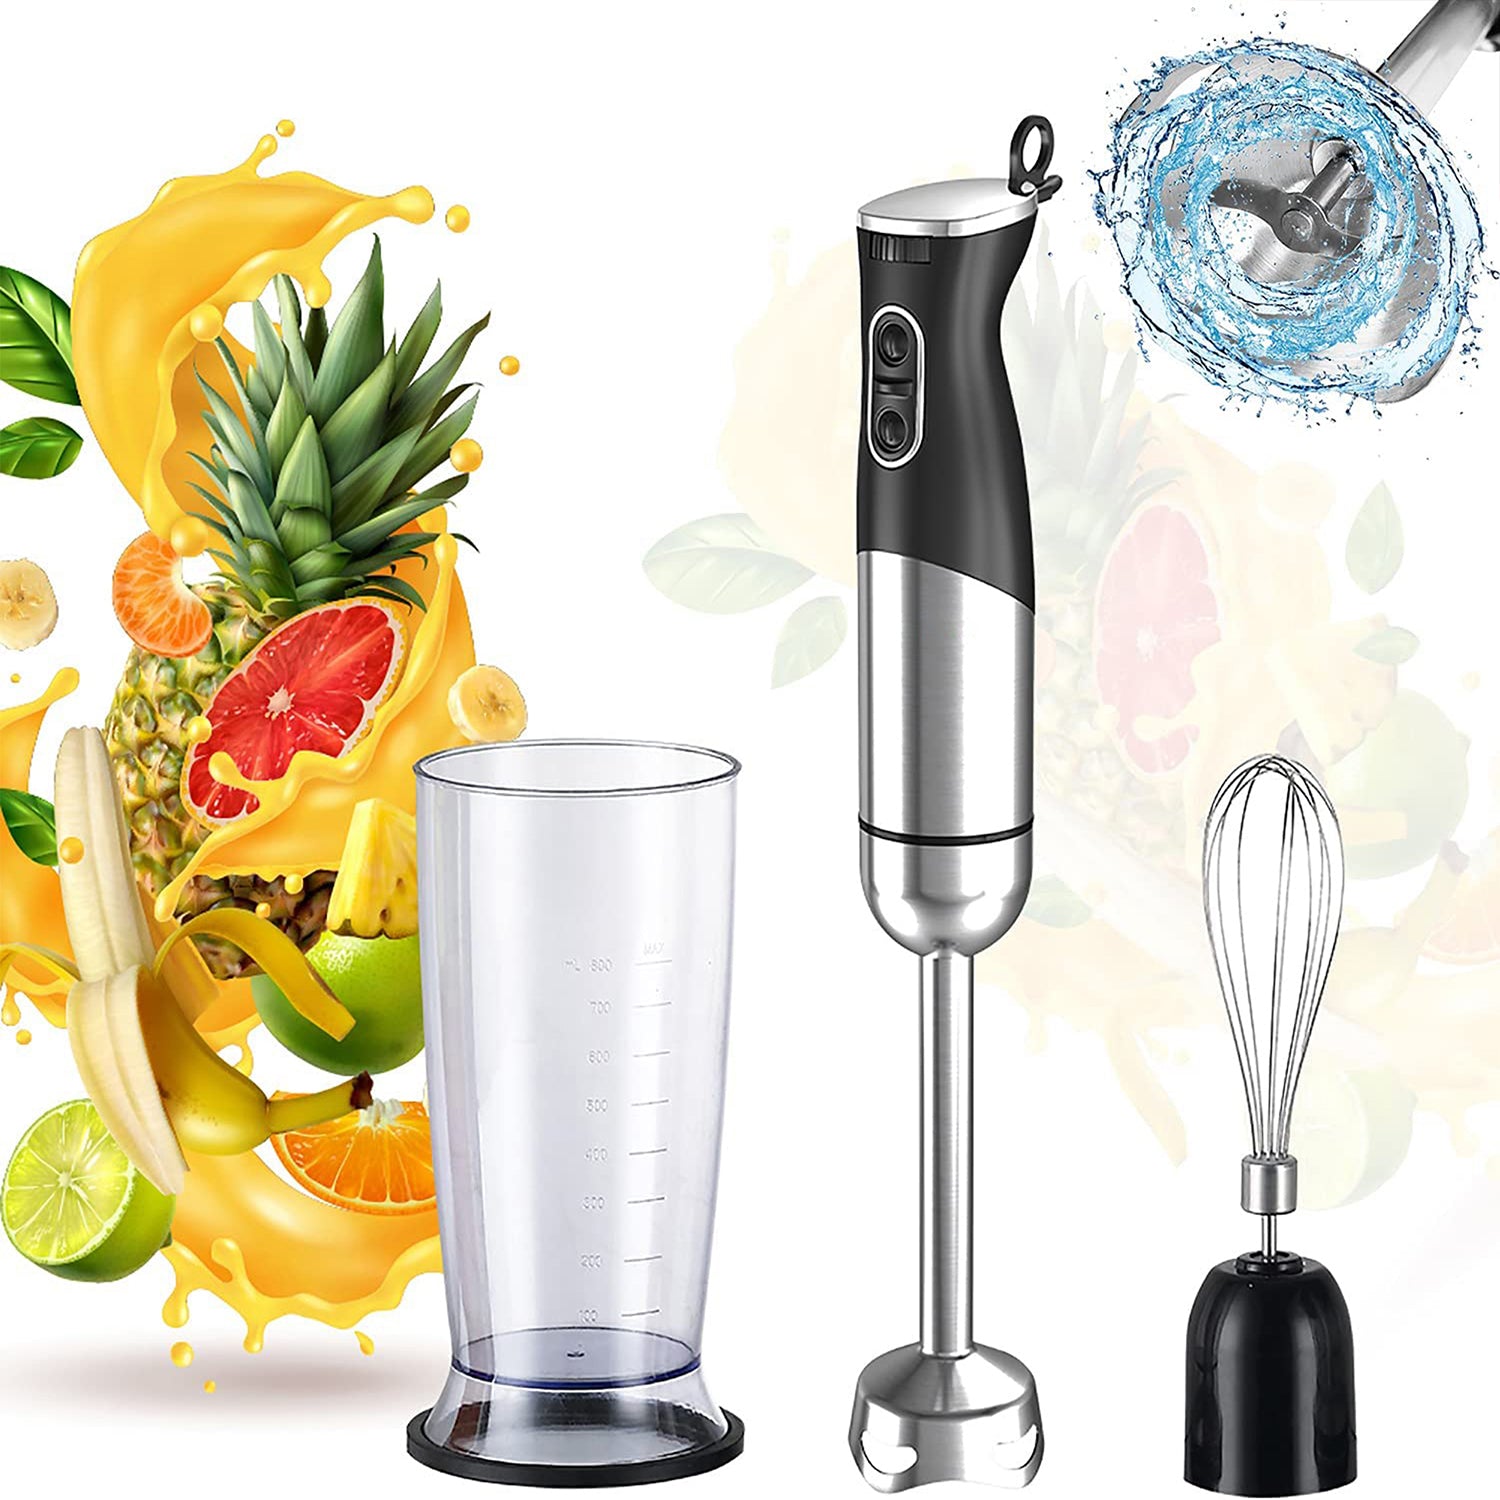 5 Core Immersion Hand Blender 500W Electric Handheld Mixer w 2 Mixing Speed for Smoothies Puree